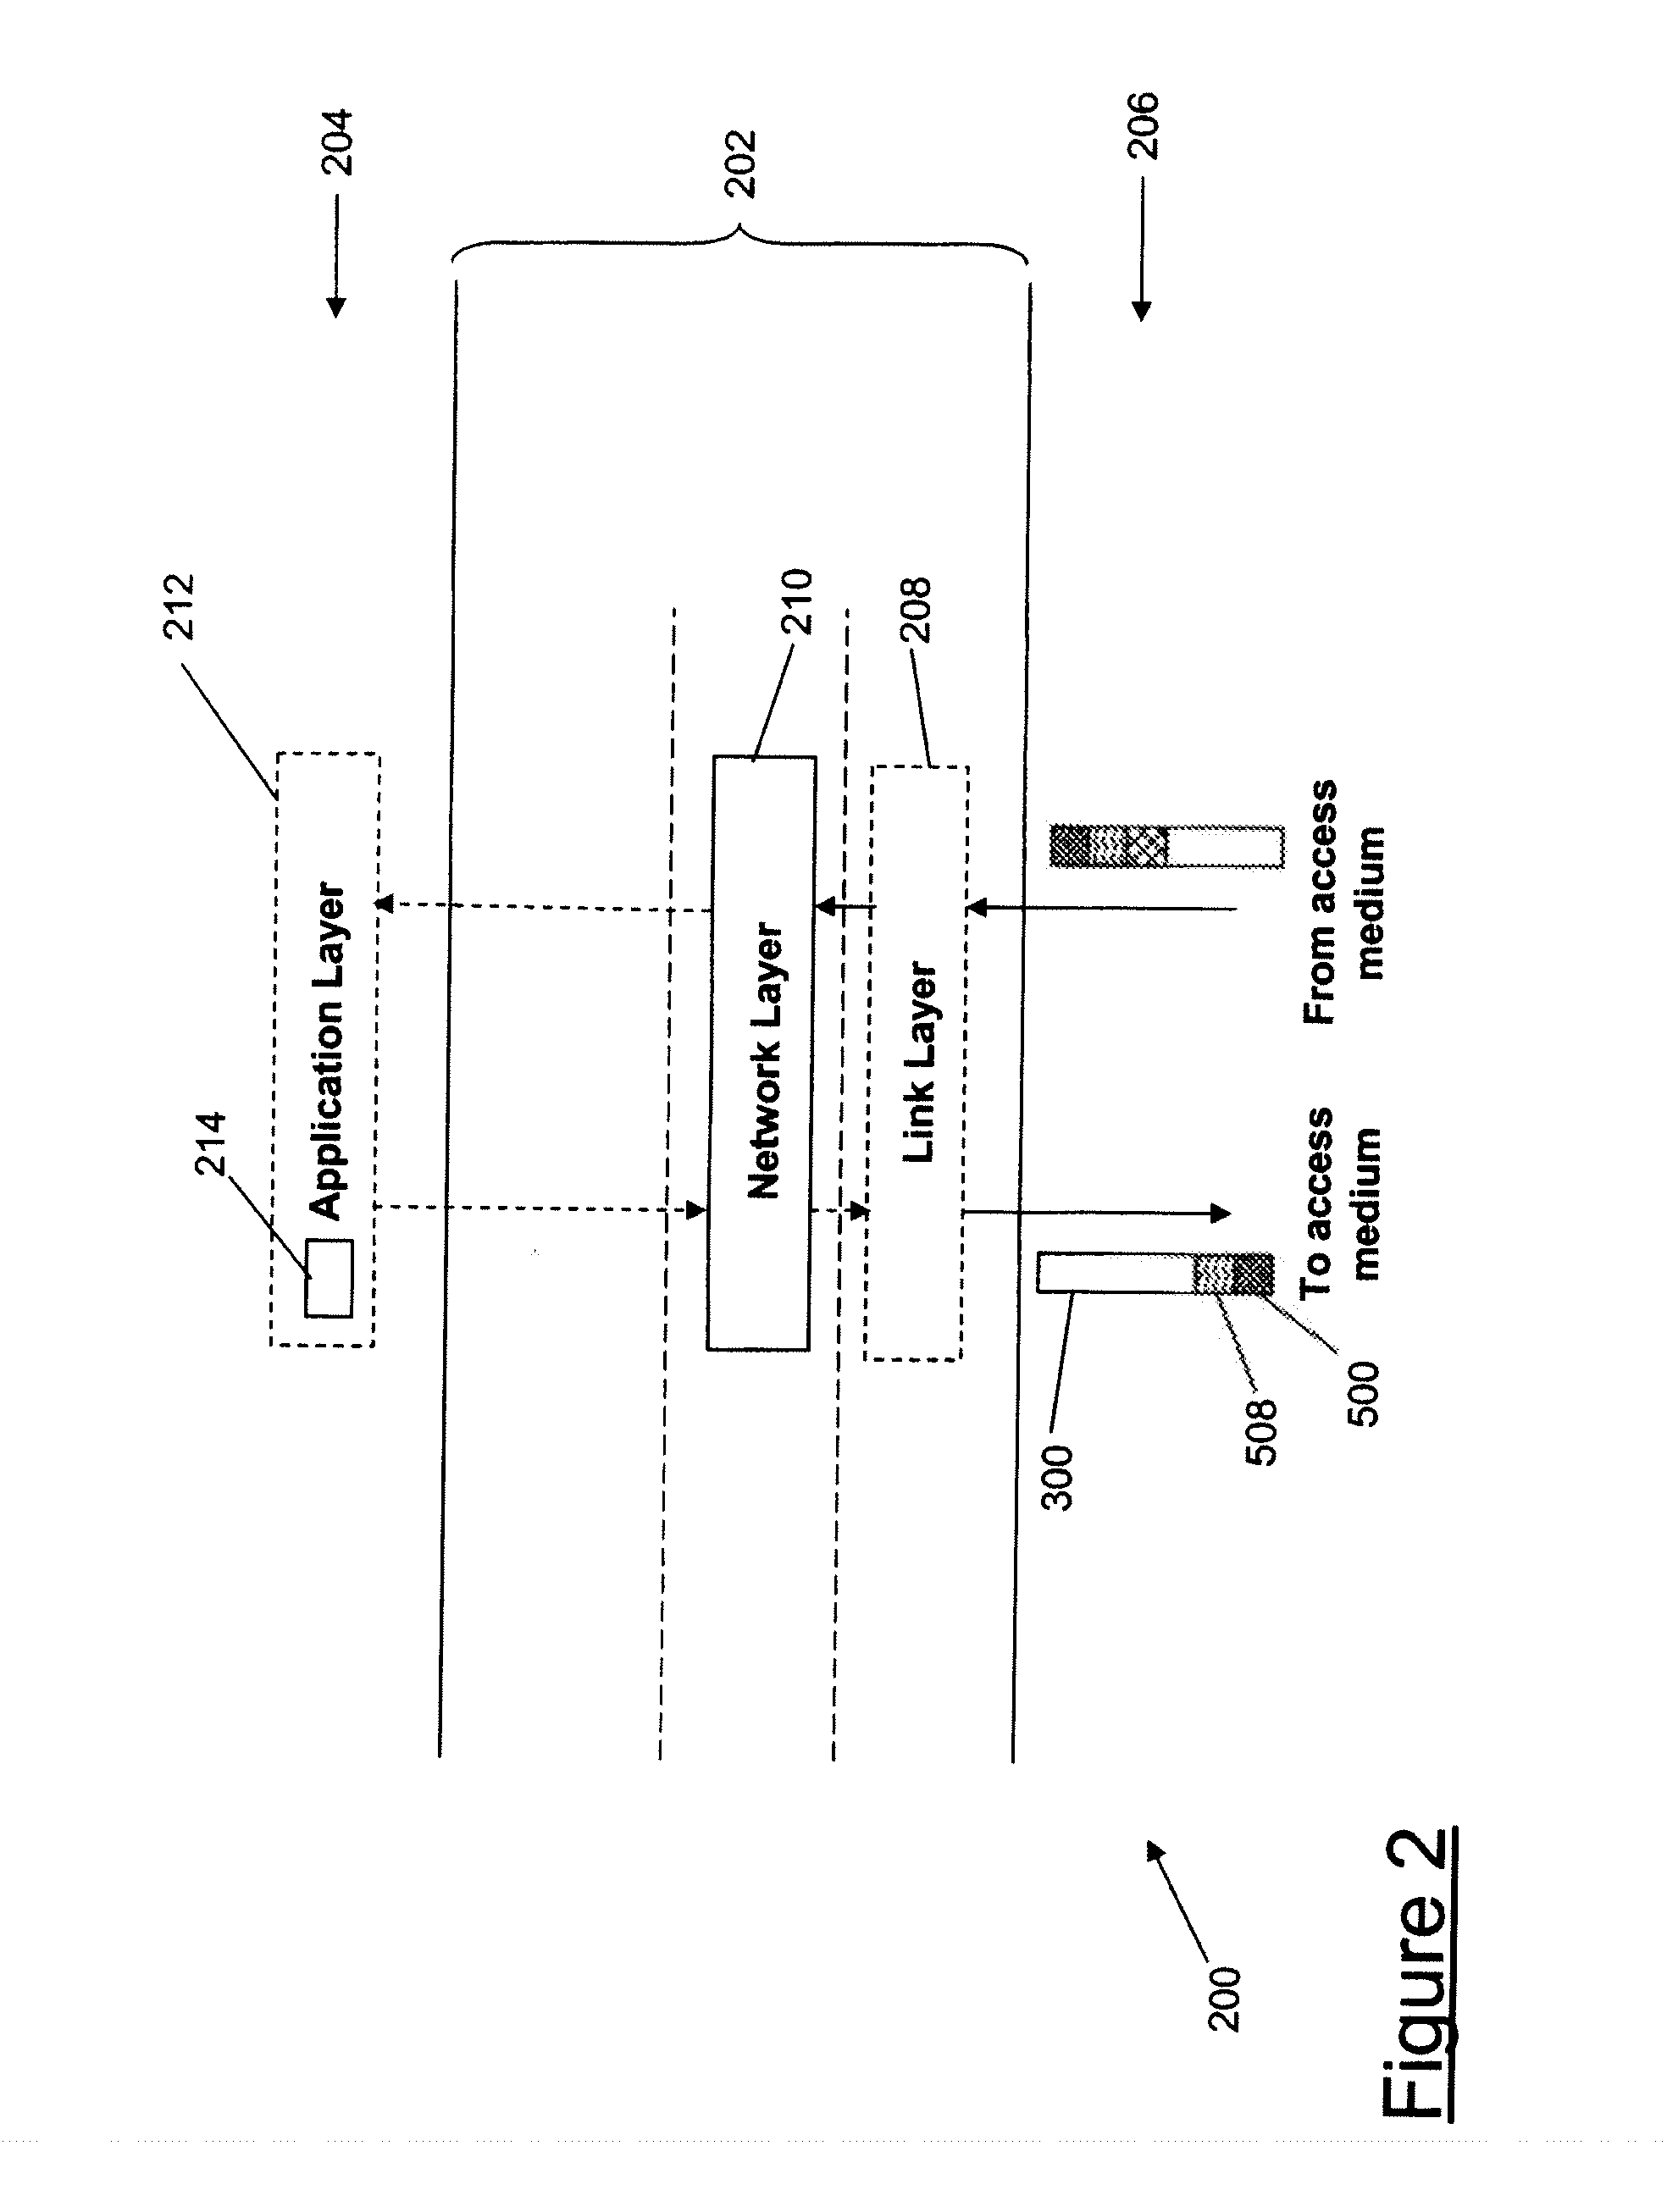 Communications system, mobile node apparatus, and method of performing a handover